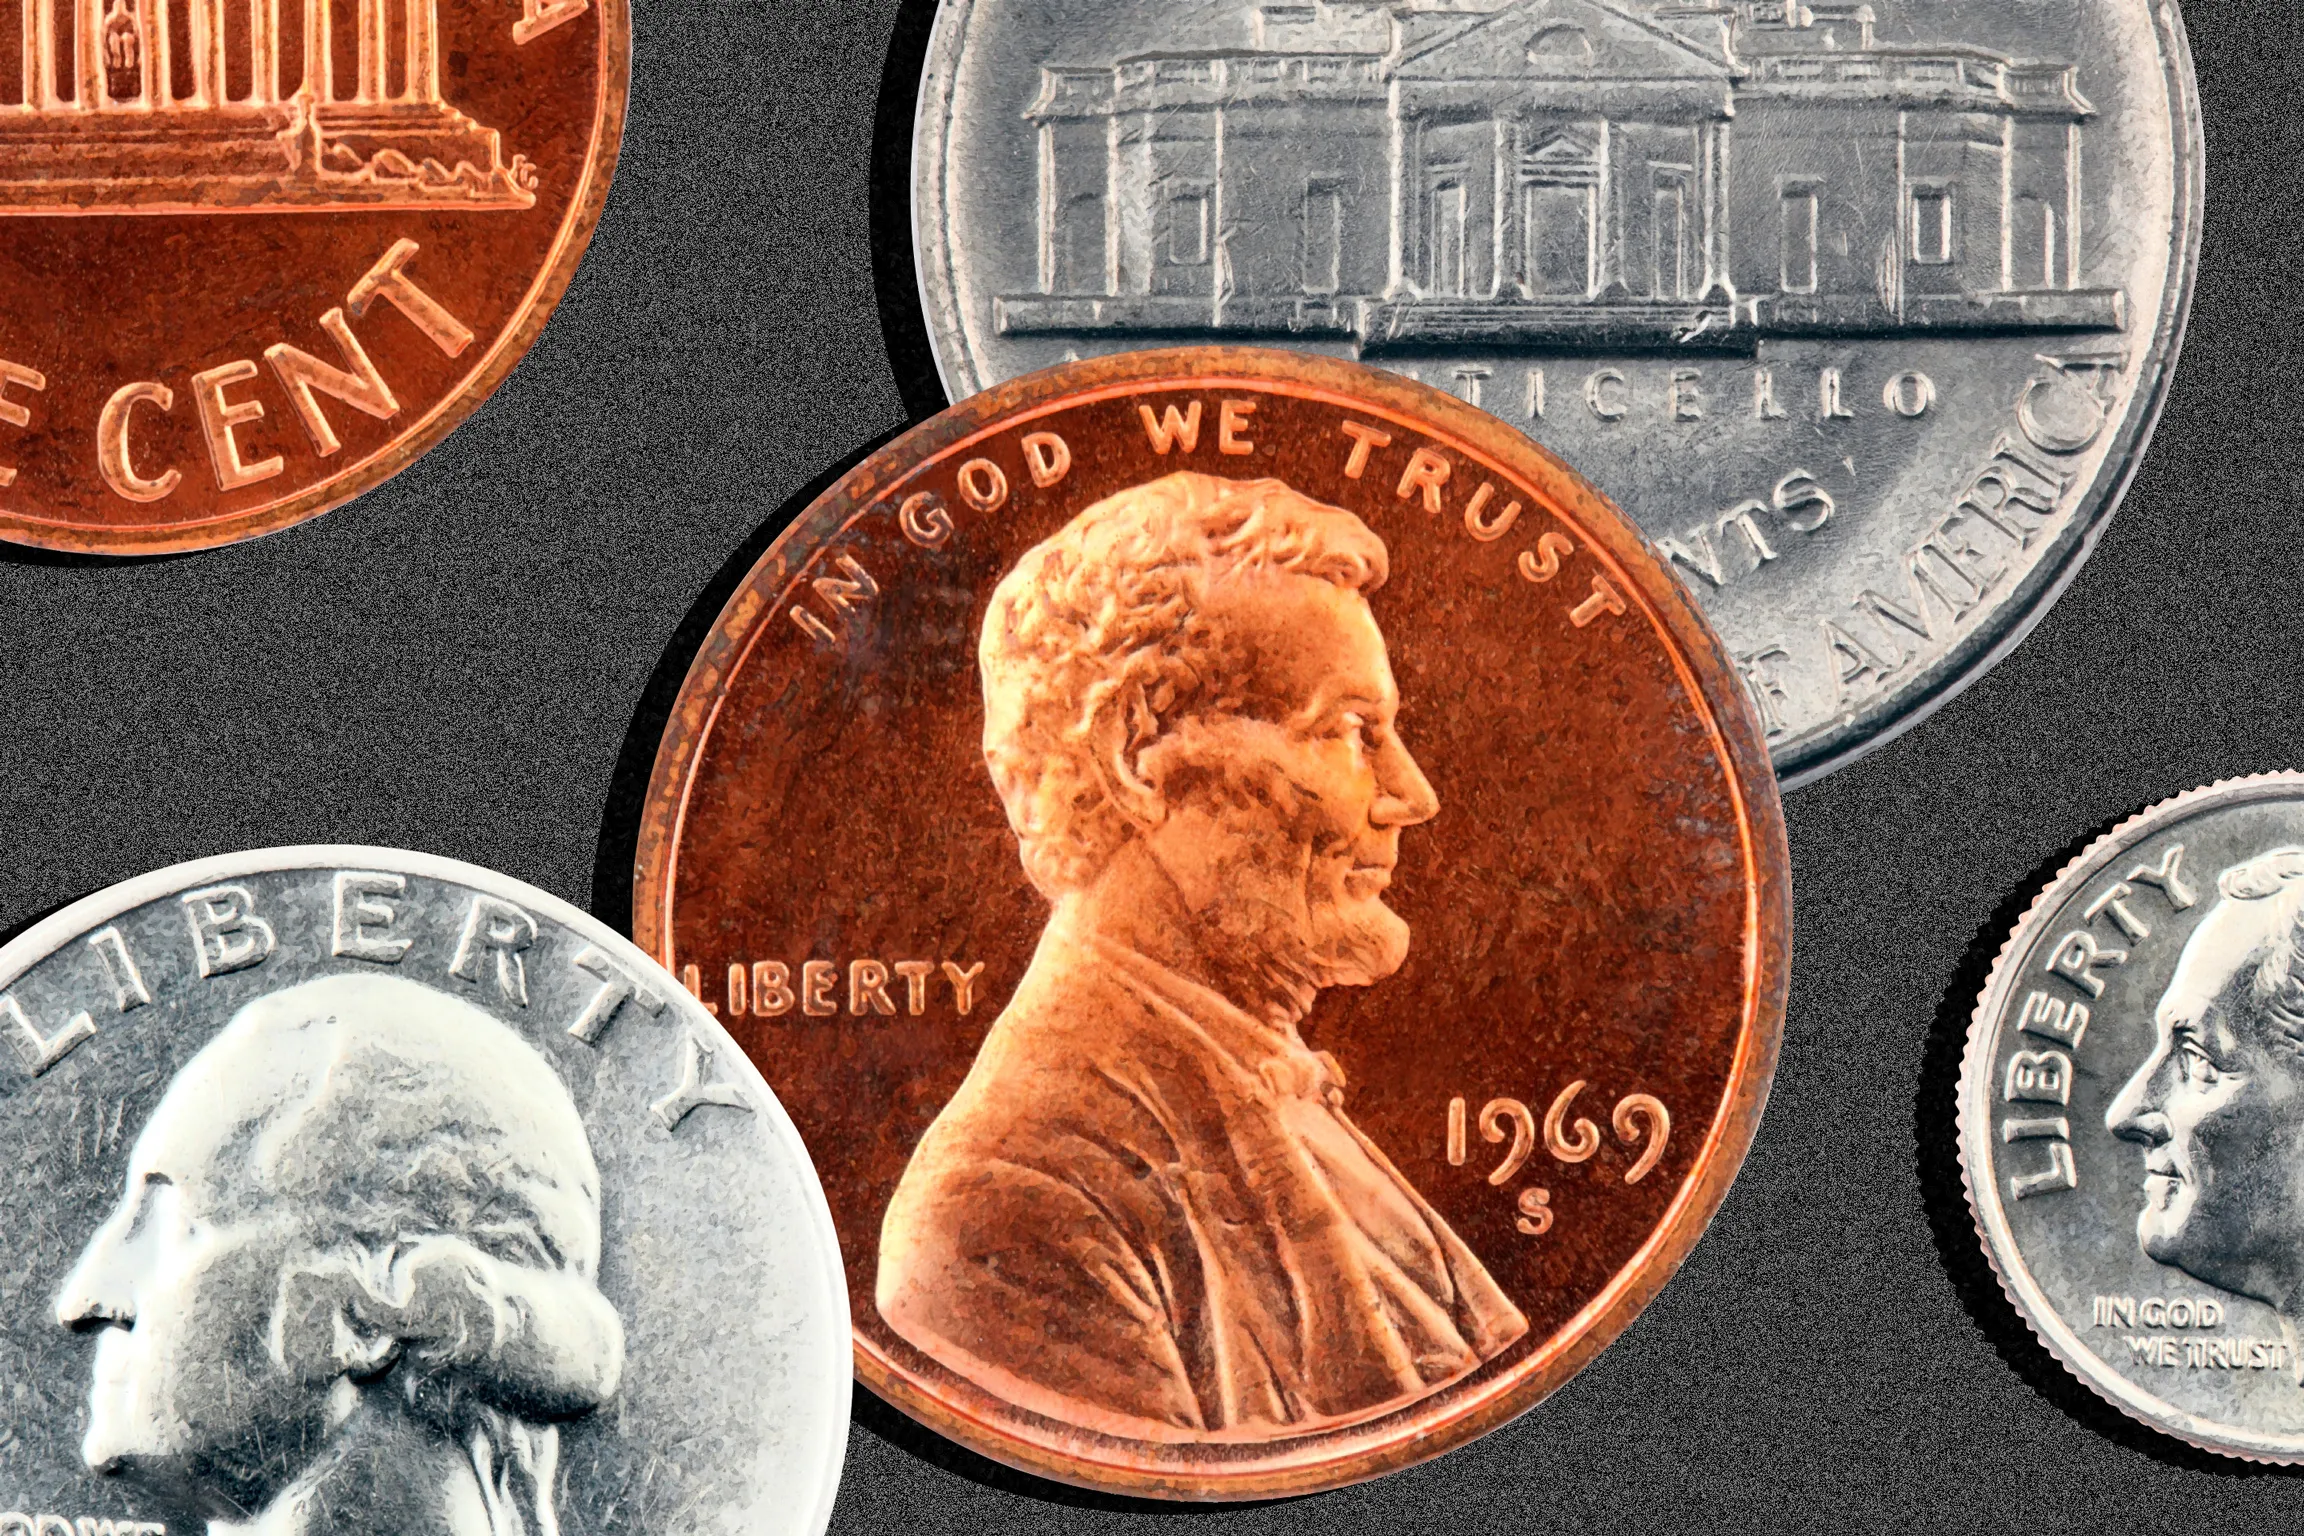 How Do You Tell If a Coin Is Real? - Grand Rapids Coins